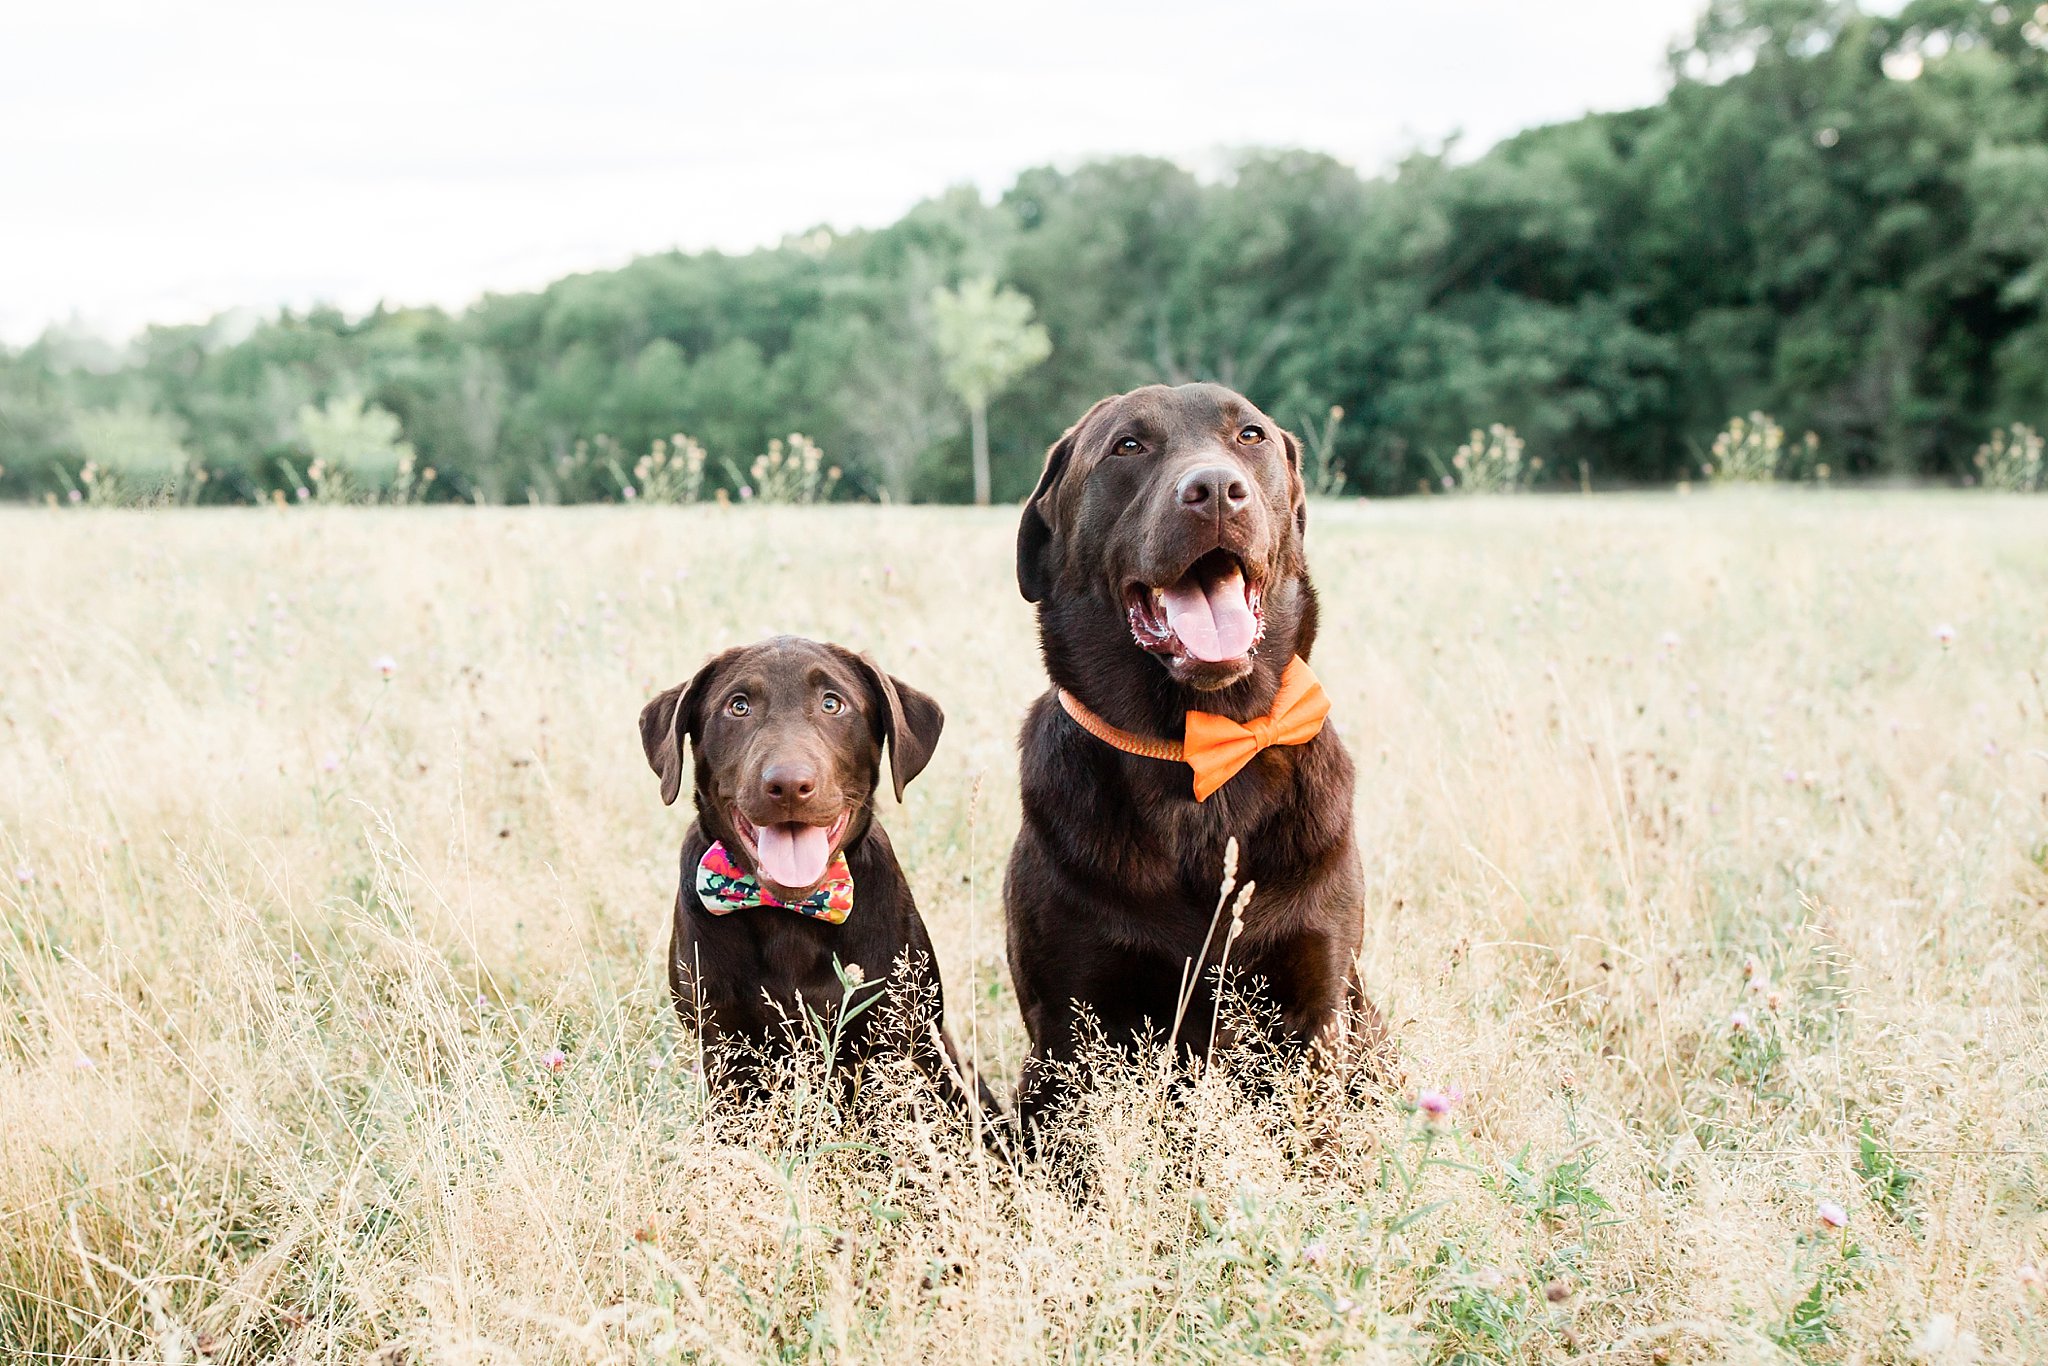 two brown labrador dogs wearing bow ties in a grassy field